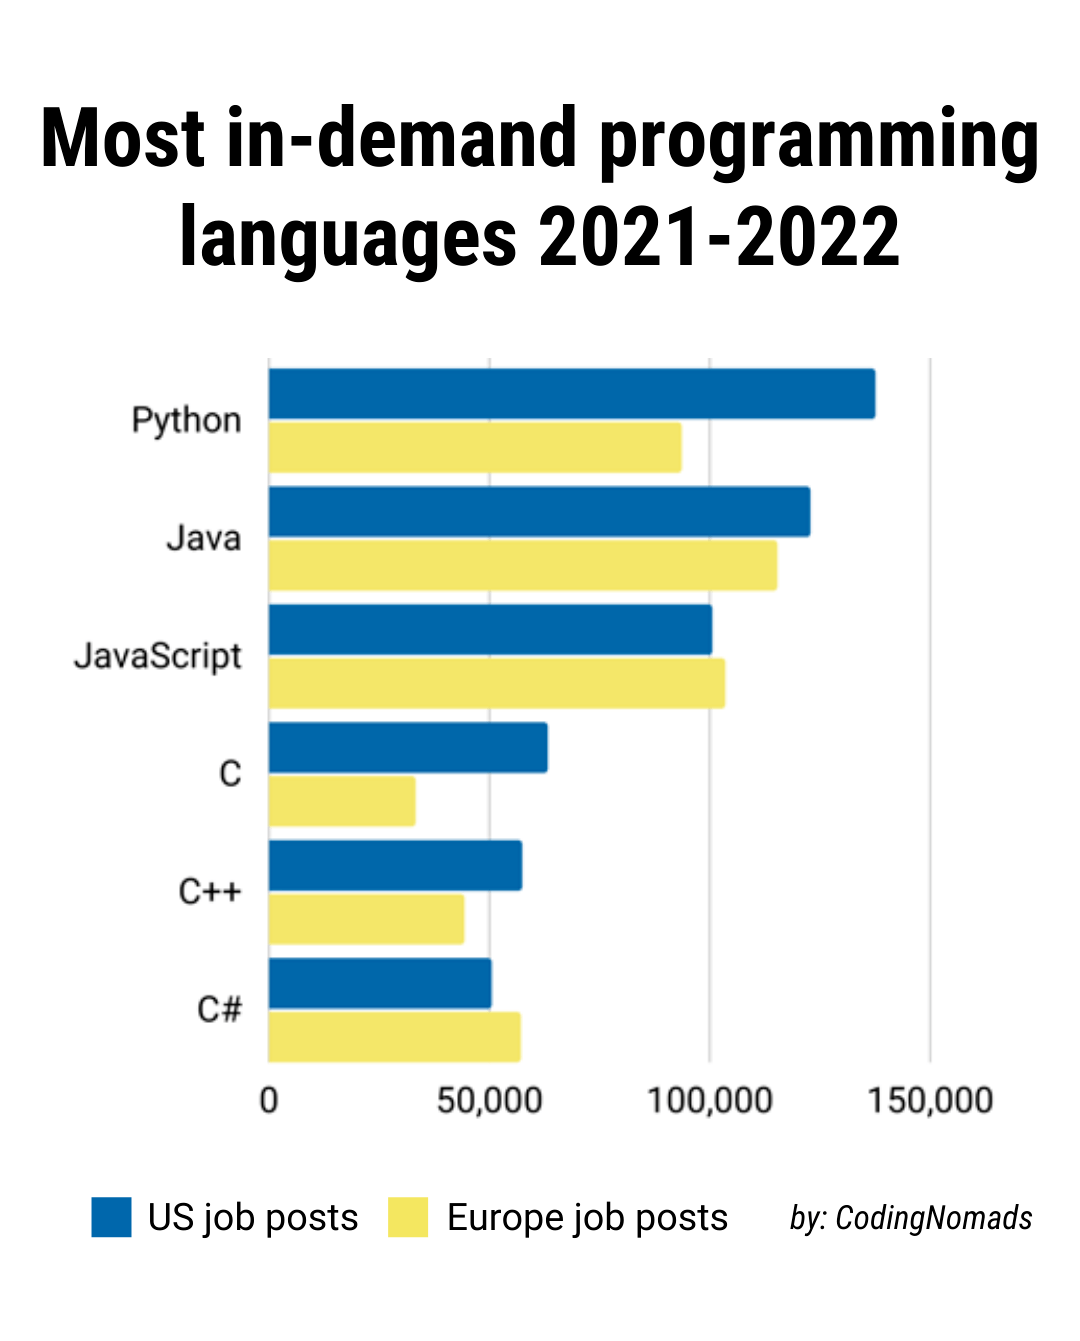 Image by CodingNomads showing top in-demand computer programming languages 2022.